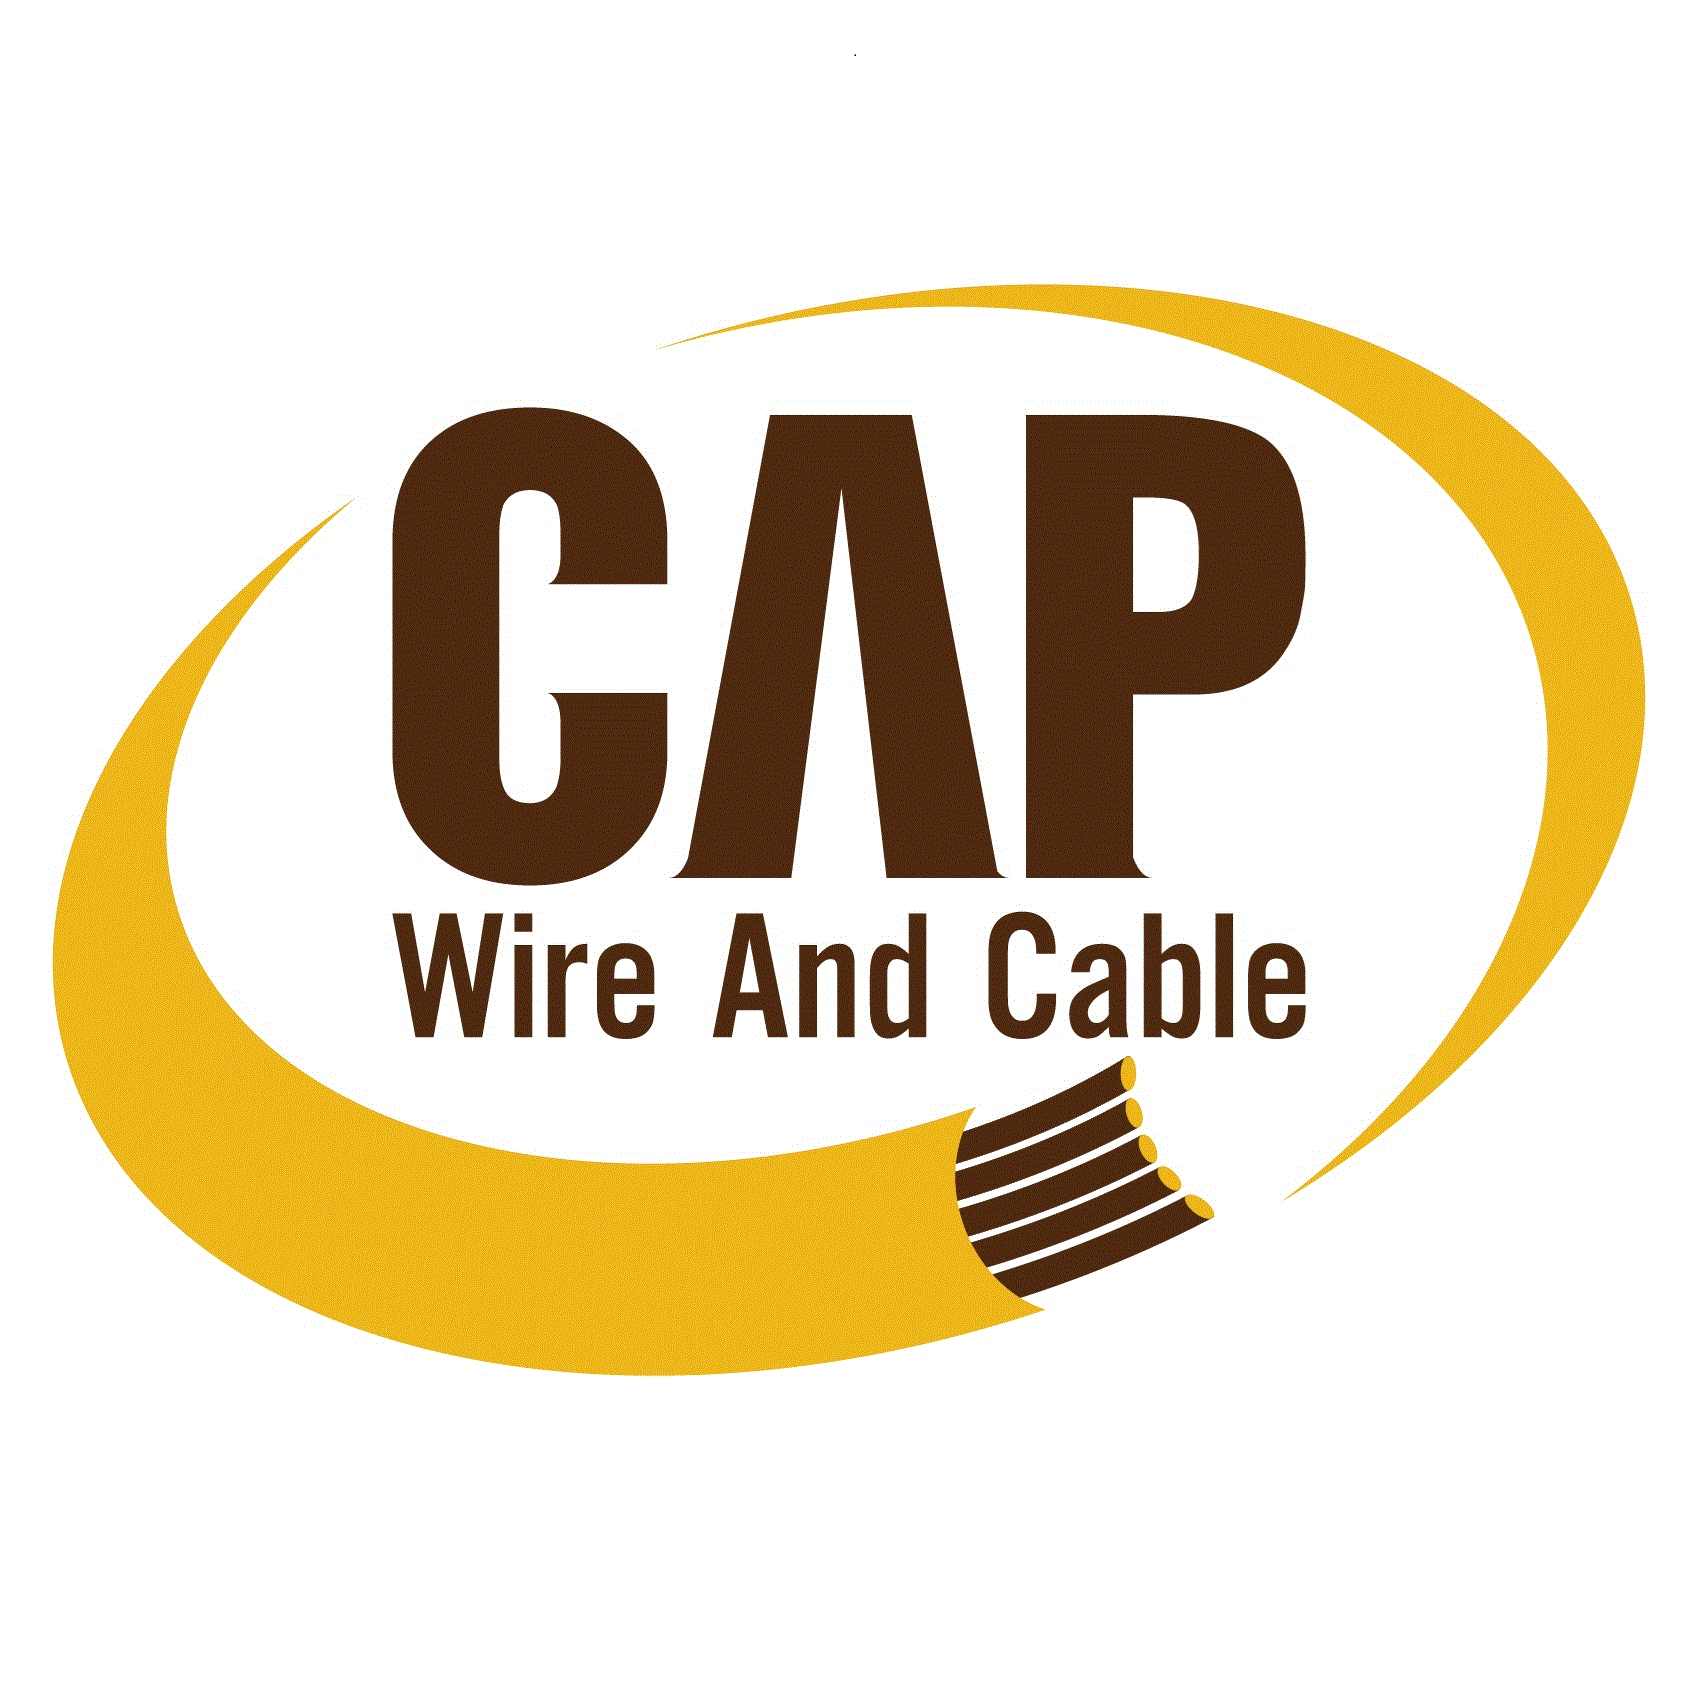 Chung Anh Phat Wire And Cable - Chung Anh Phat Wire And Cable Joint Stock Company